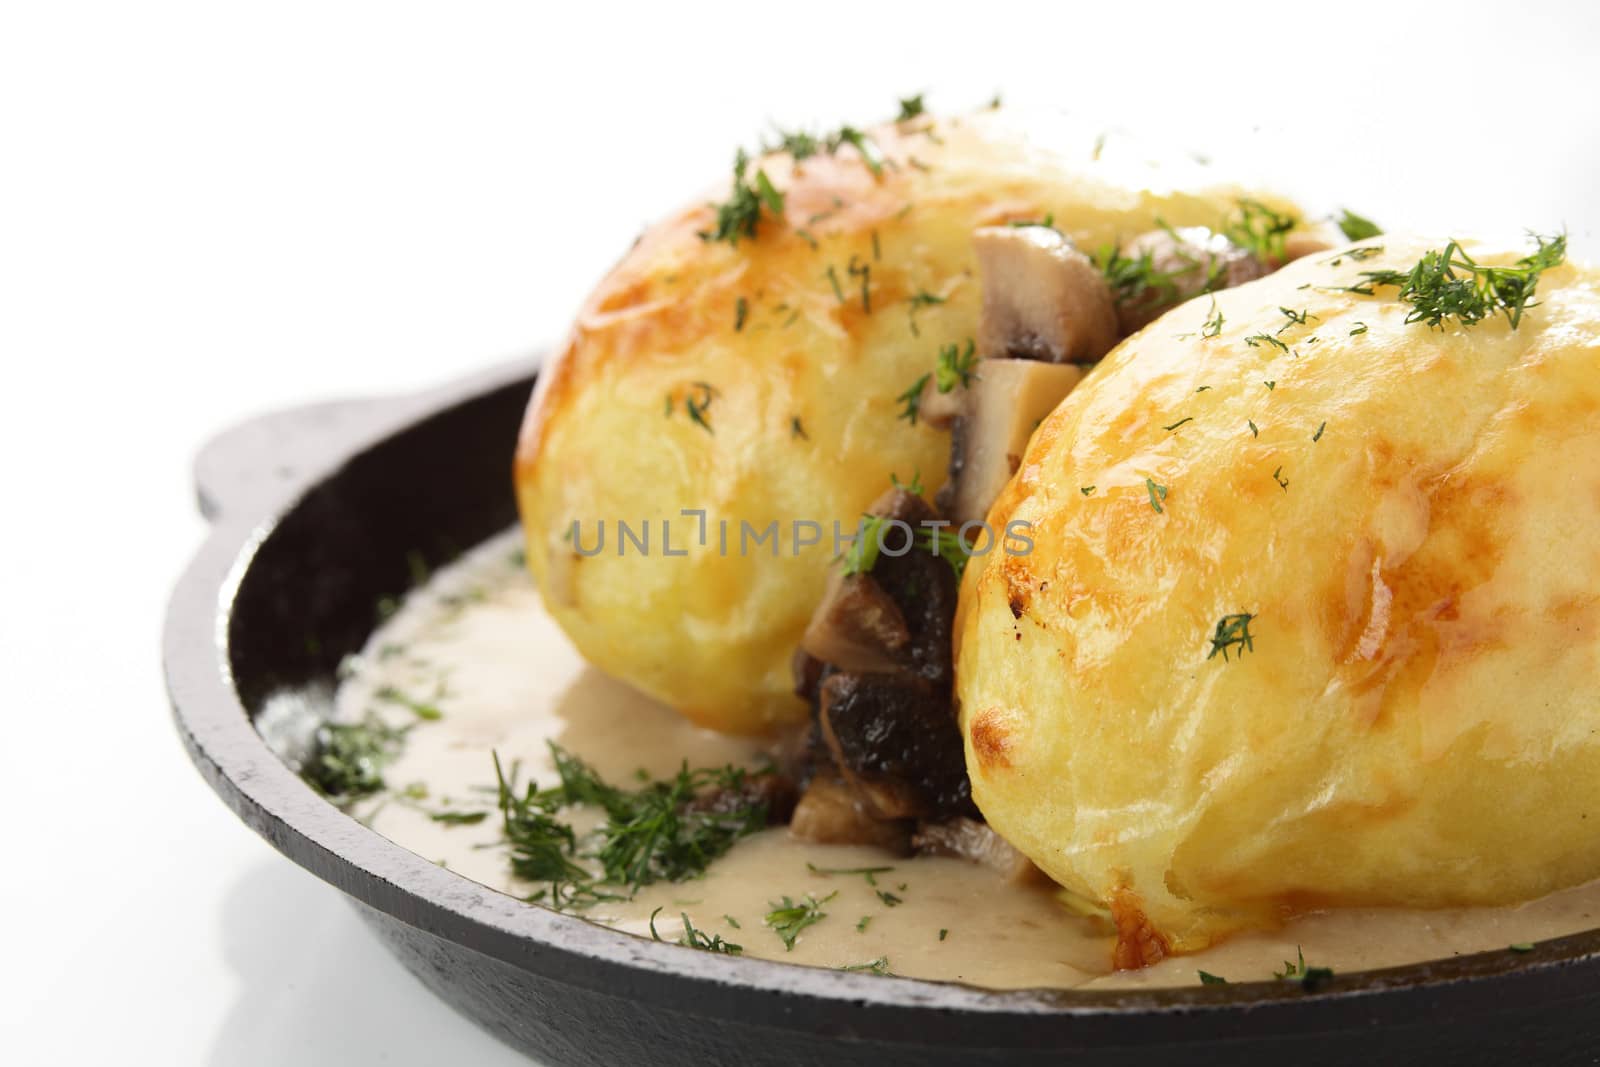 roasted potato with mushrooms by fiphoto